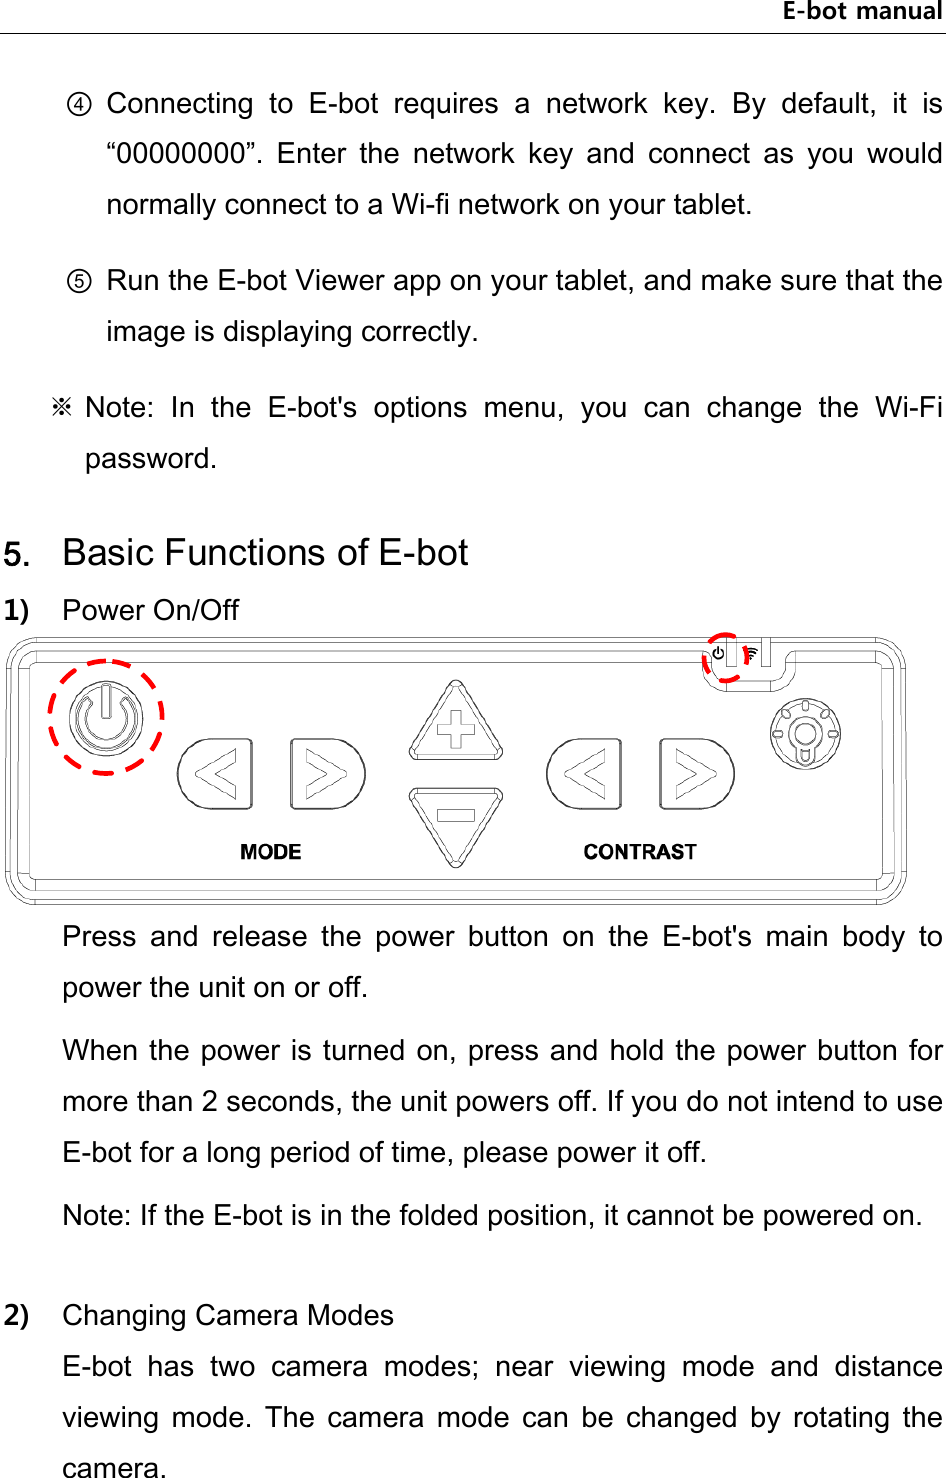 E-bot manual ④ Connecting  to  E-bot  requires  a  network  key.  By  default,  it  is “00000000”.  Enter  the  network  key  and  connect  as  you  would normally connect to a Wi-fi network on your tablet. ⑤ Run the E-bot Viewer app on your tablet, and make sure that the image is displaying correctly.   ※ Note:  In  the  E-bot&apos;s  options  menu,  you  can  change  the  Wi-Fi password.    5. Basic Functions of E-bot 1) Power On/Off  Press  and  release  the  power  button  on  the  E-bot&apos;s  main  body  to power the unit on or off. When the power is turned on, press and hold the power button for more than 2 seconds, the unit powers off. If you do not intend to use E-bot for a long period of time, please power it off.   Note: If the E-bot is in the folded position, it cannot be powered on.  2) Changing Camera Modes E-bot  has  two  camera  modes;  near  viewing  mode  and  distance viewing  mode.  The  camera  mode  can  be  changed  by  rotating  the camera.   